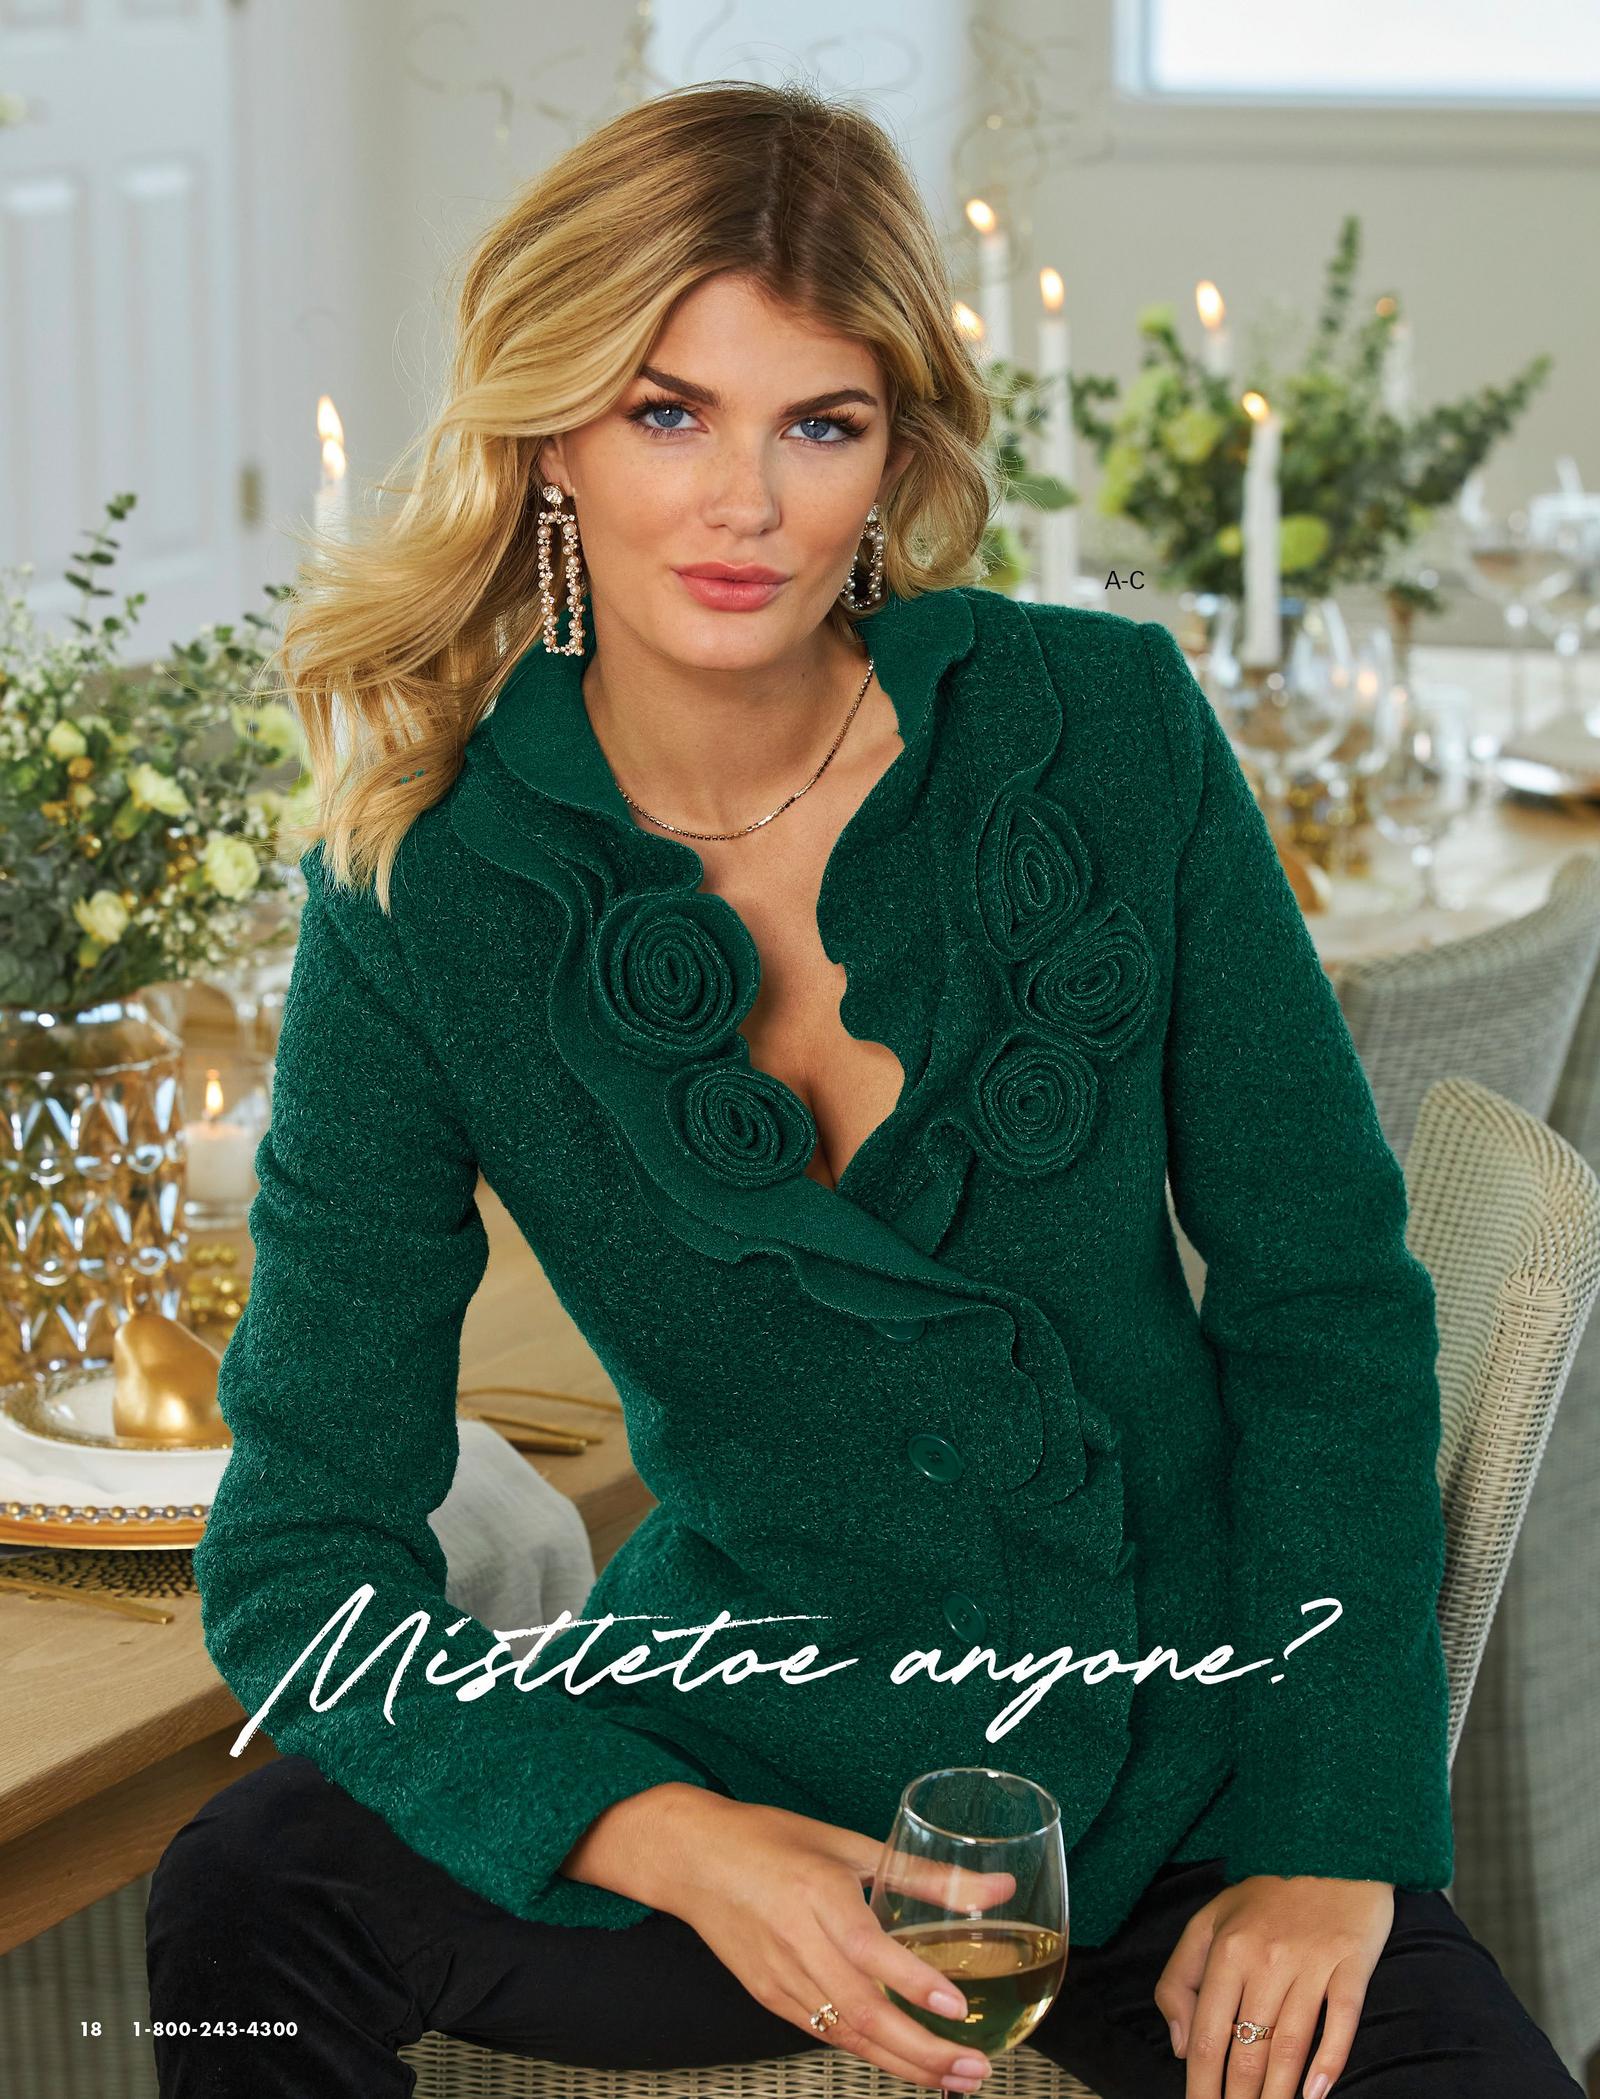 model wearing a green rosette cardigan and black pants.